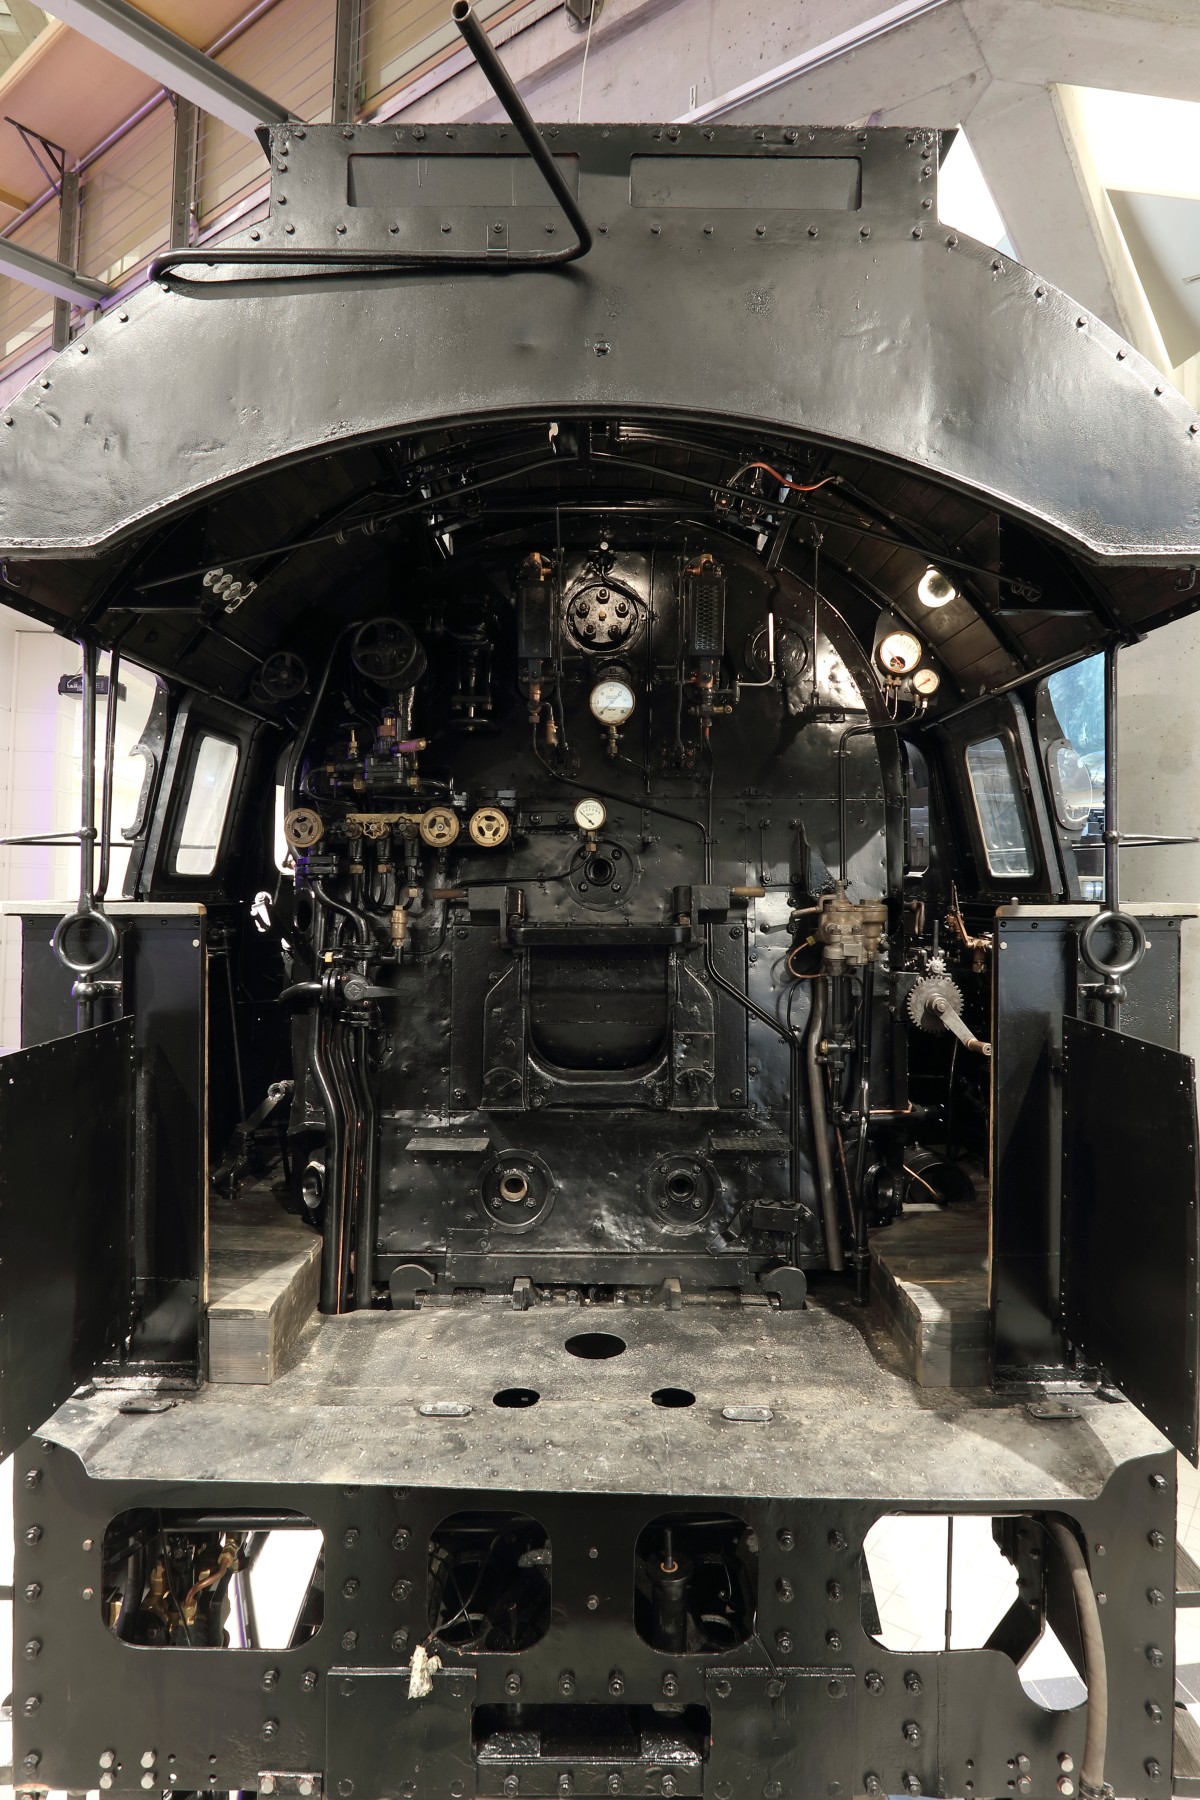 View of the driver’s cabin of the 12.10 steam locomotive